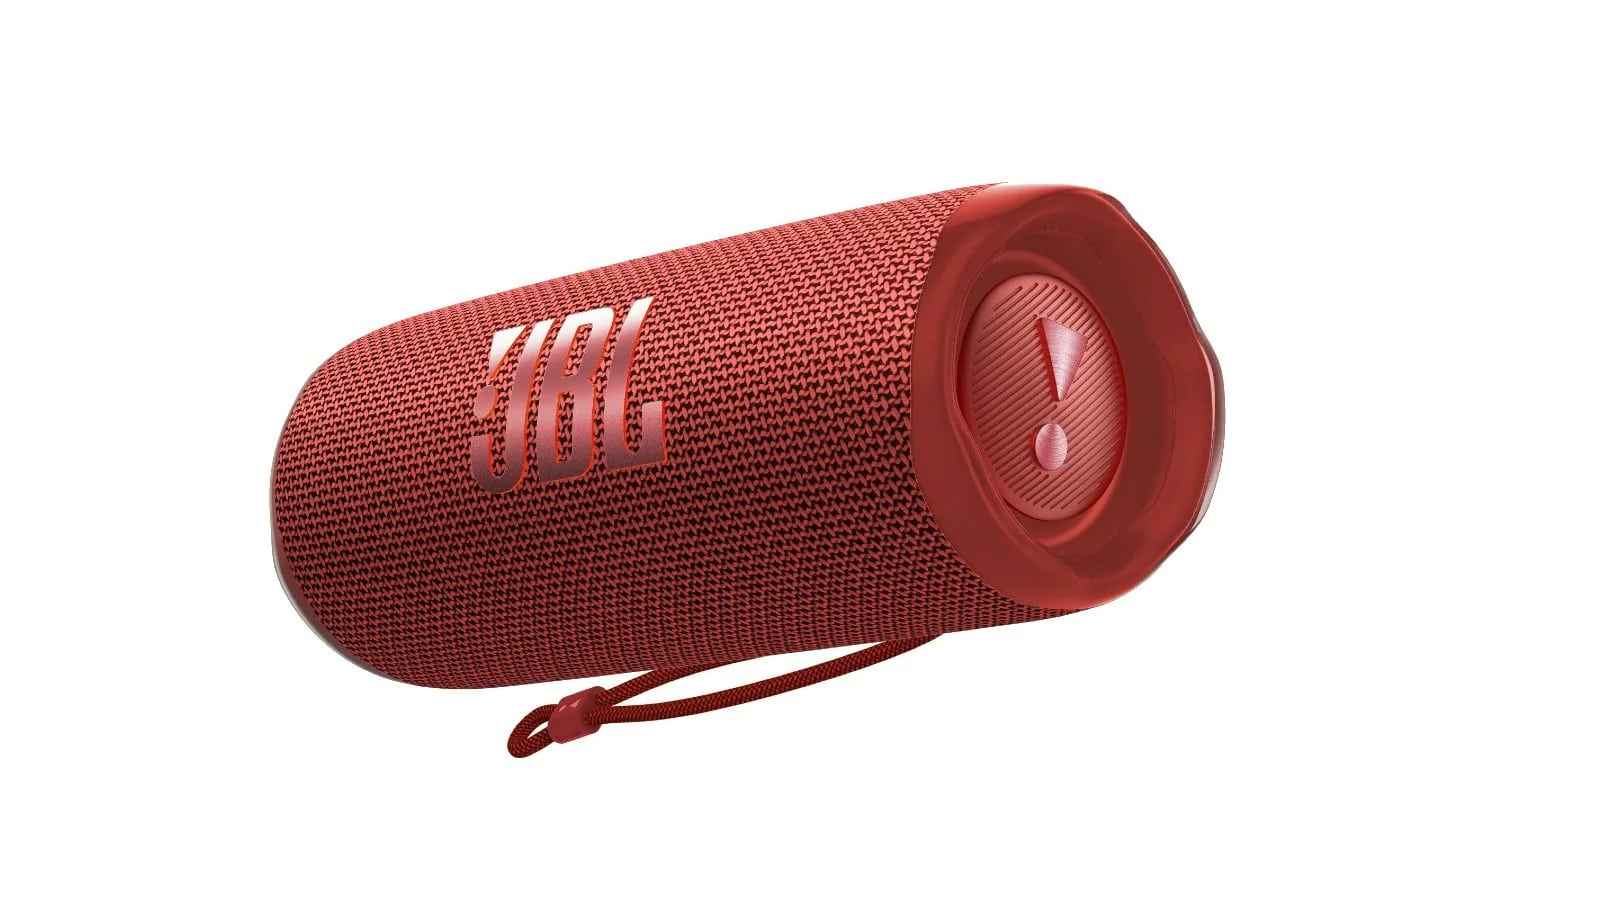 JBL Flip 6 launched in India, price starts at Rs 14,999